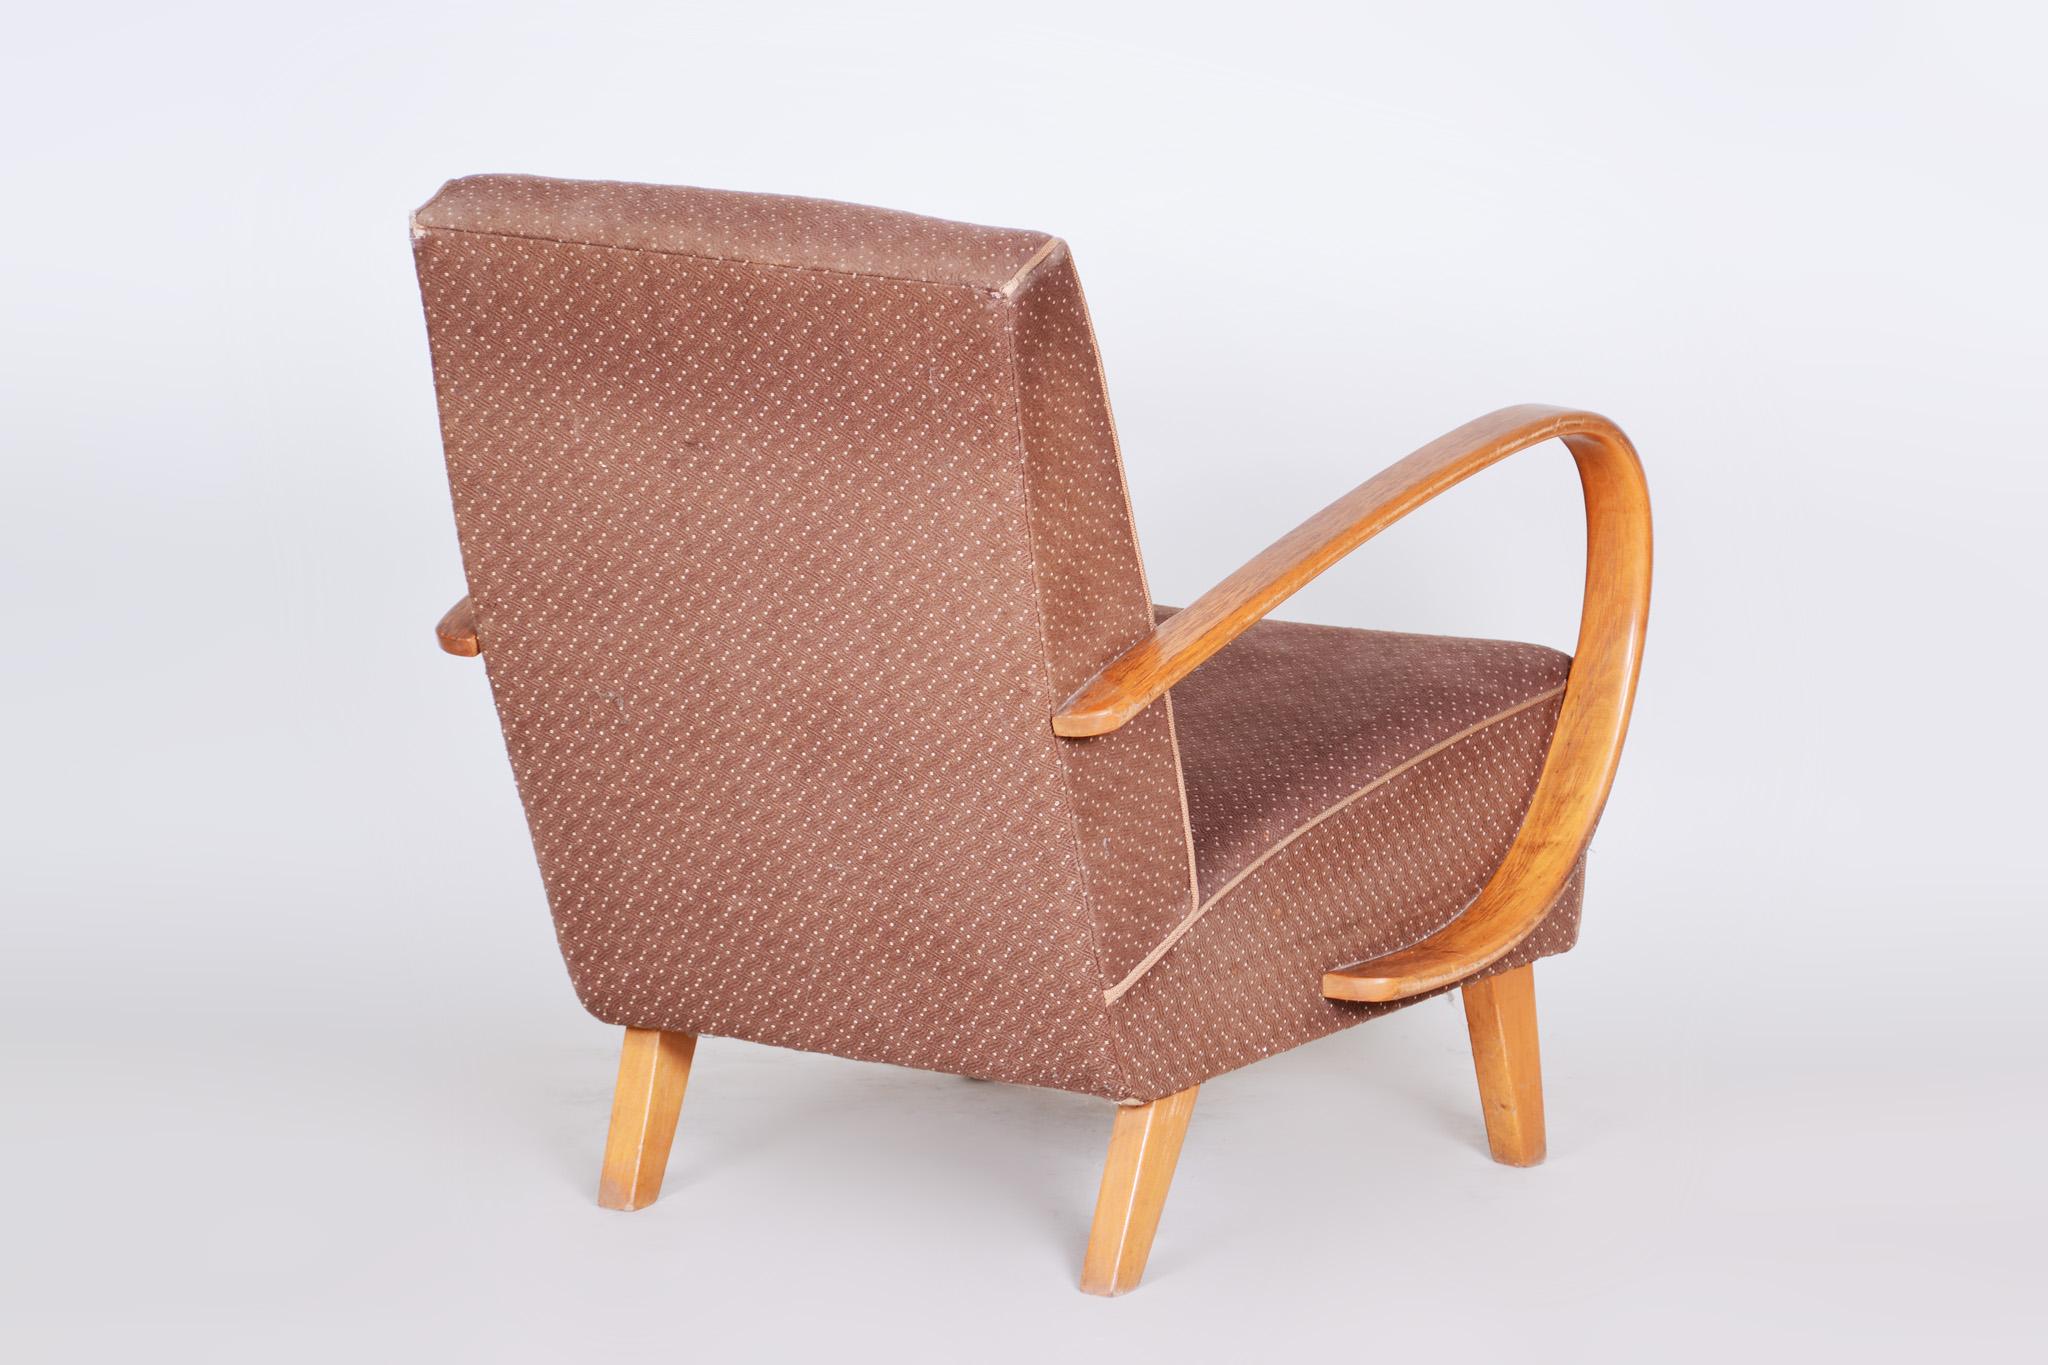 Brown Armchair, Made in Czechia, 1930s, Original Condition, Art Deco Style For Sale 2